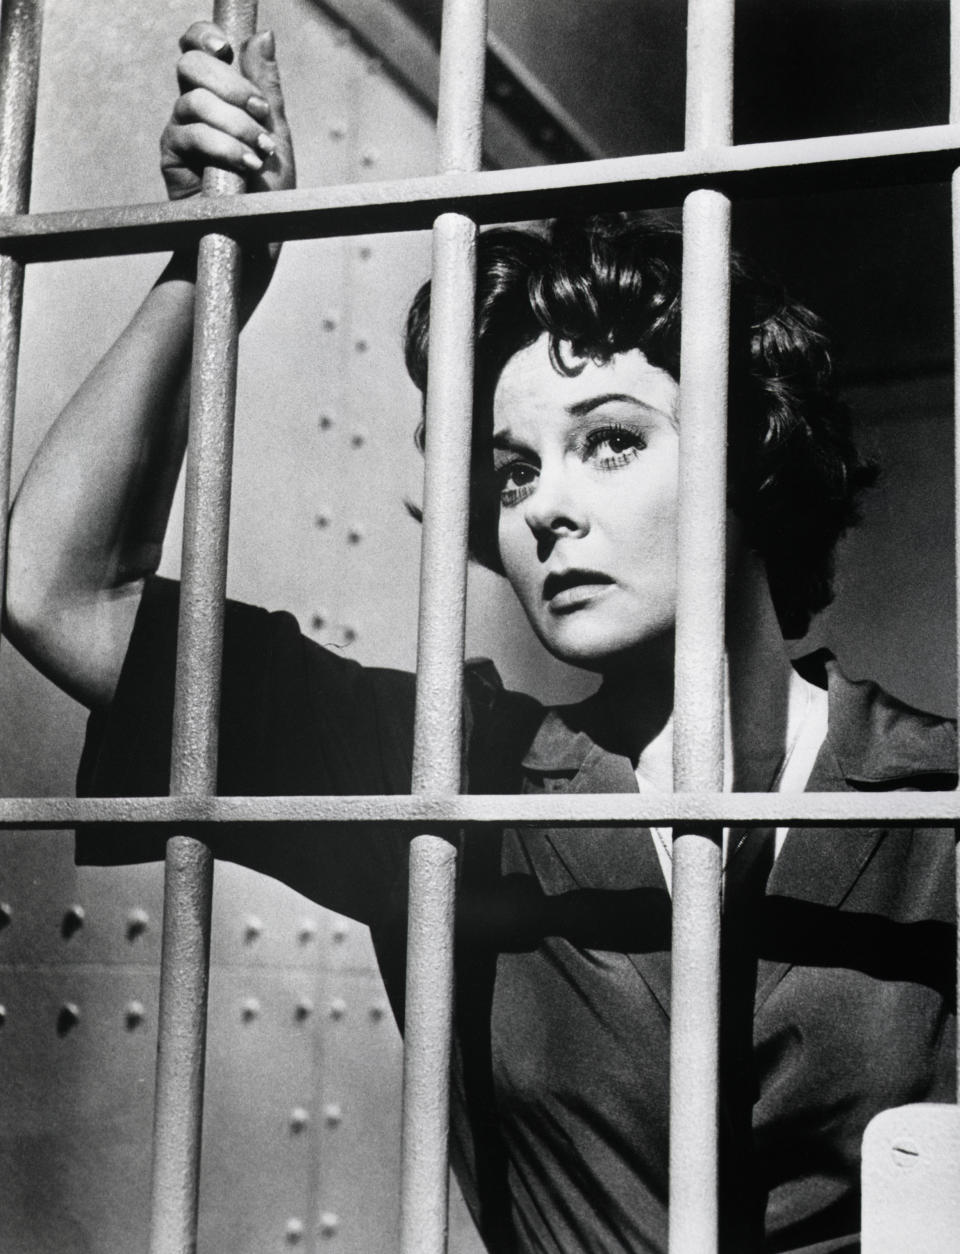 Susan Hayward won an Oscar for her role as Barbara Grahmn in the 1958 movie I Want to Live!